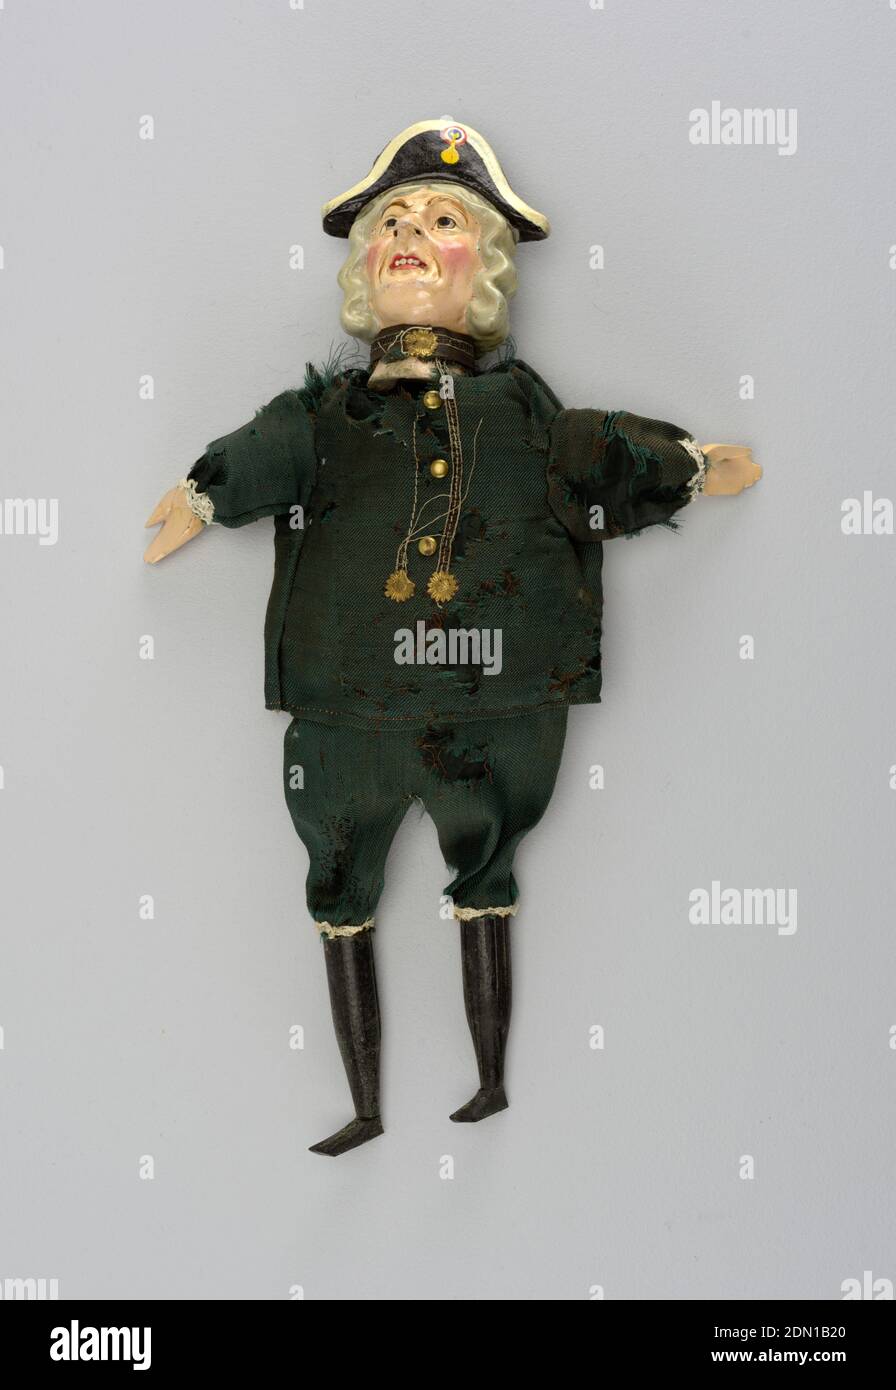 The Admiral, Painted wood, cotton, other materials, Brightly painted head with black and white bicorn with tri colored cockade. Green uniform. Black hose and shoes. Gold buttons and decorations. Lace at knees and cuffs. Possible a caricature of Admiral Nelson., England, late 19th century, theater, Decorative Arts, Puppet, Puppet Stock Photo